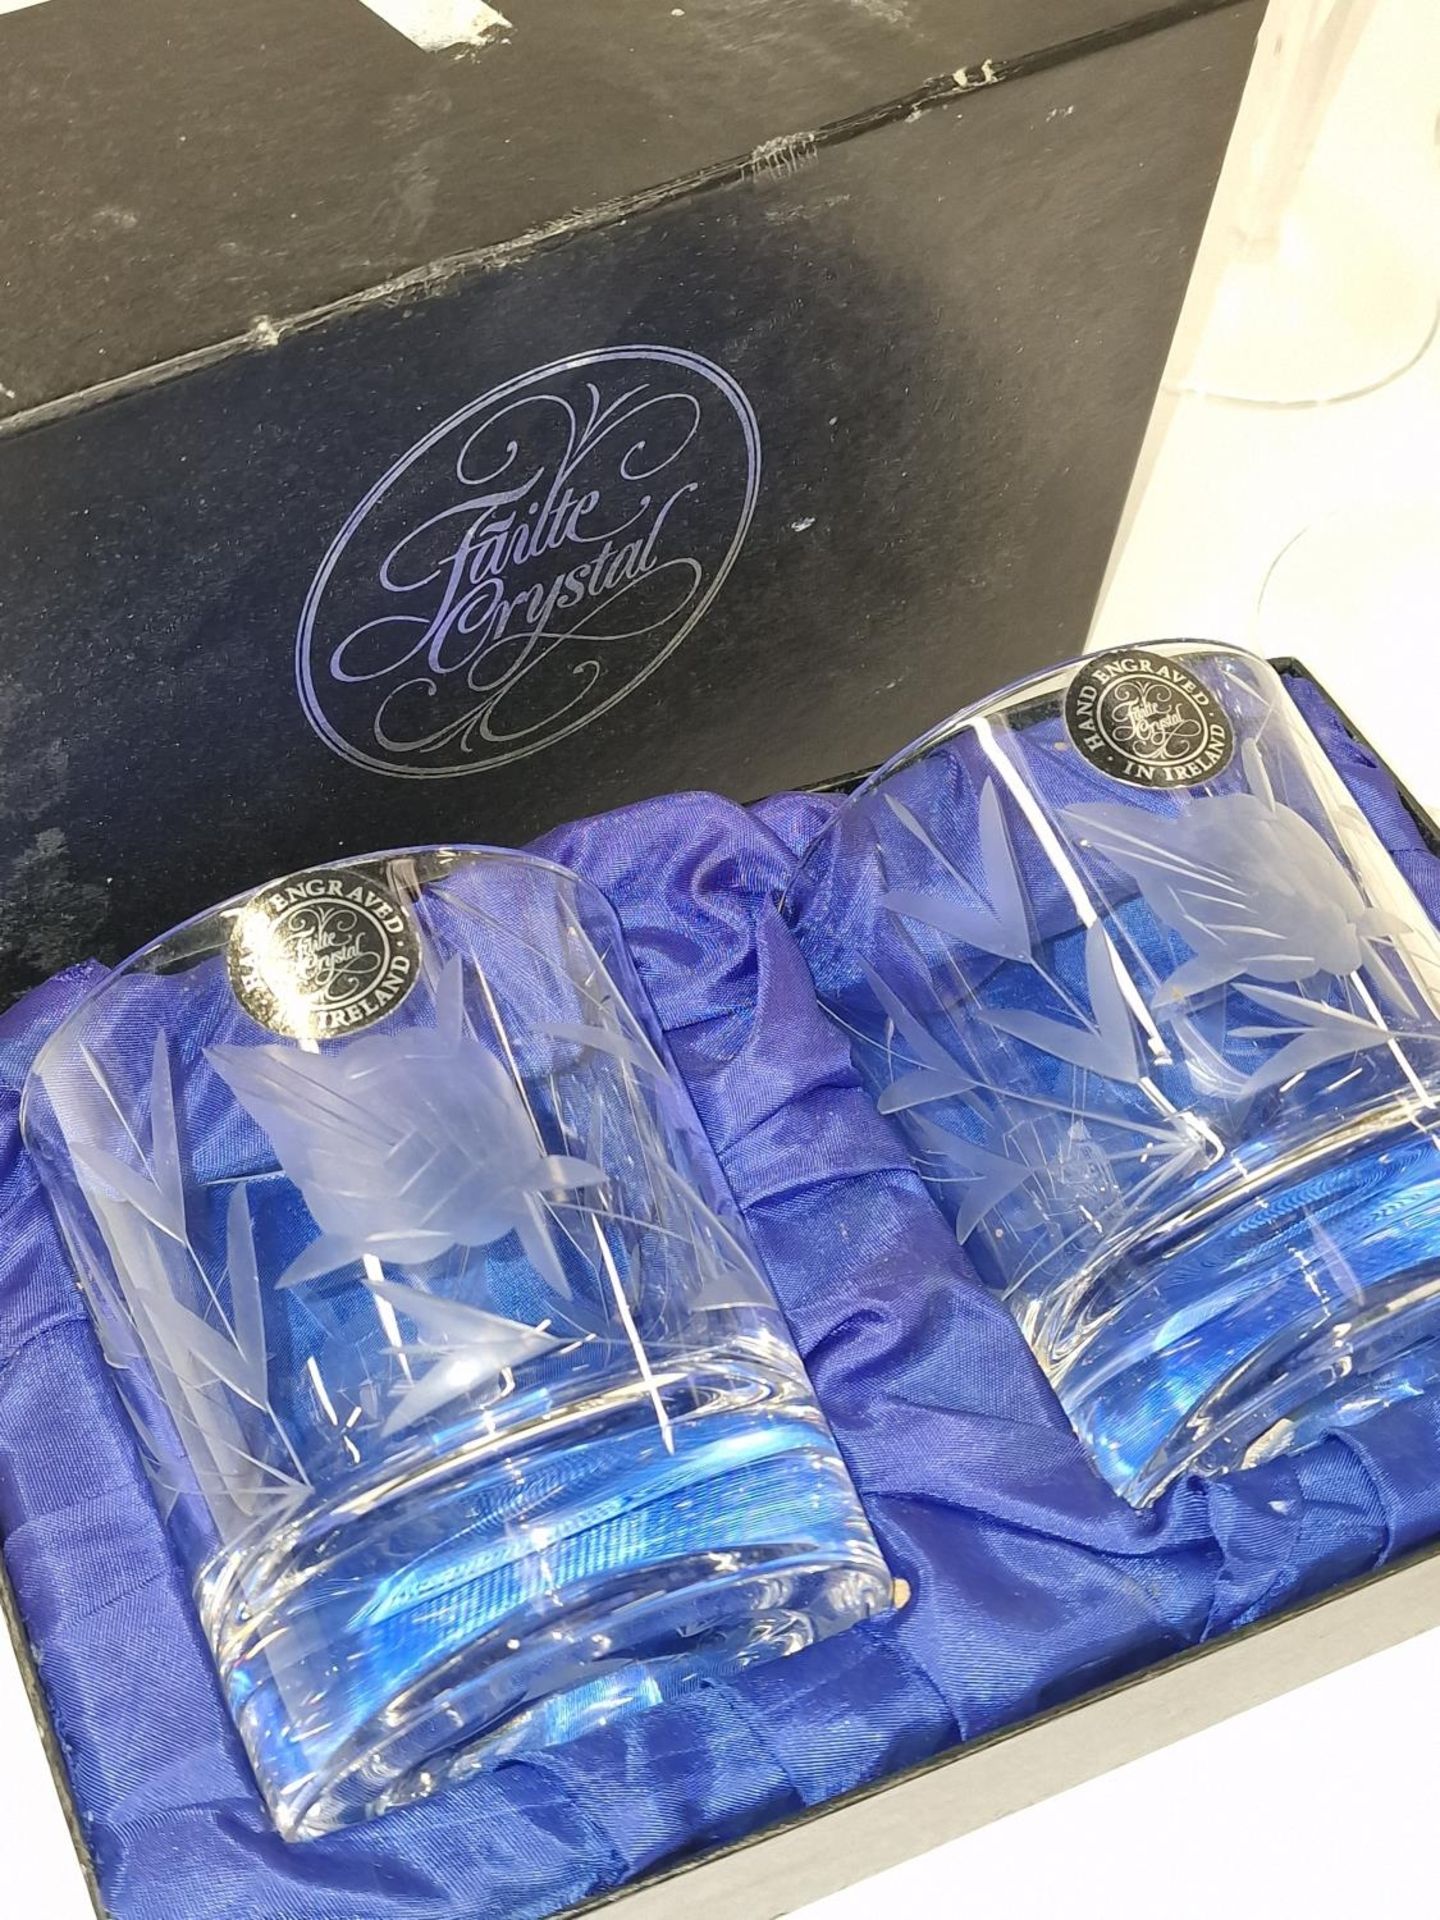 A set of 6 Royal Doulton crystal Luna wine glasses, a Royal Doulton wine carafe and a boxed pair - Image 3 of 4